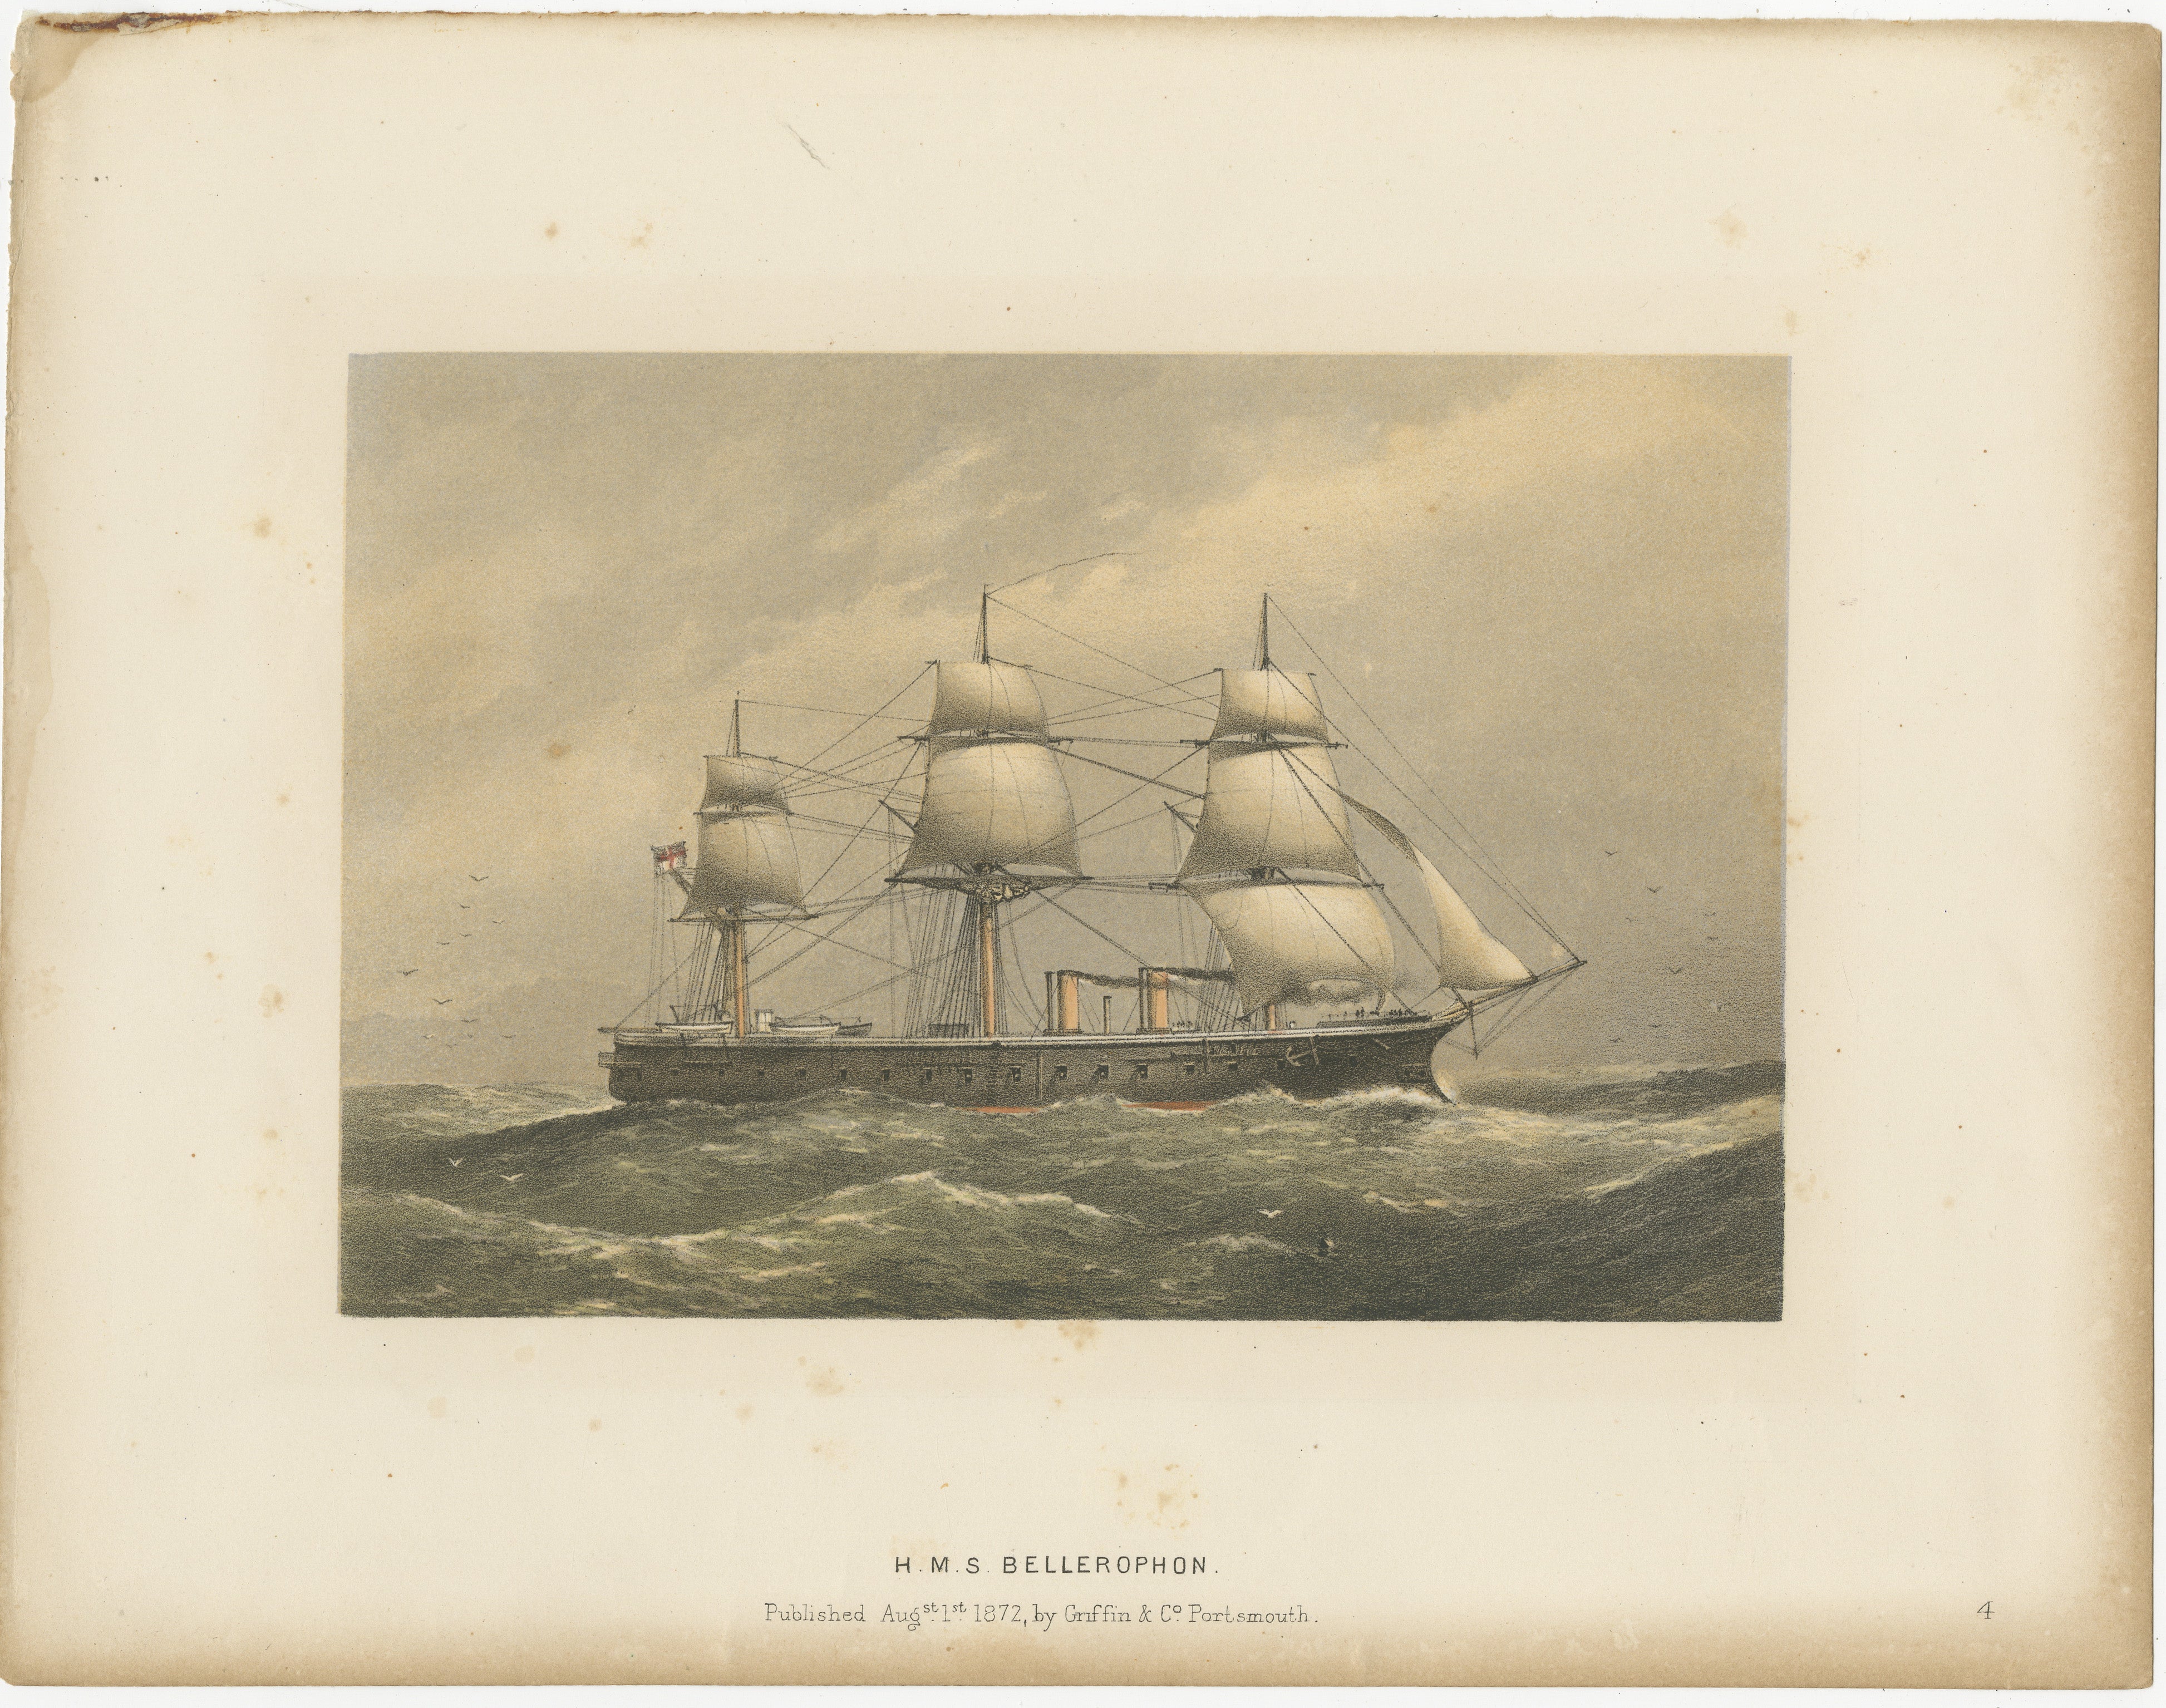 This original antique image is a print depicting the H.M.S. Bellerophon, a ship of the British Royal Navy. The print is rendered in a monochromatic color scheme with subtle hand coloring, which was a common technique in the 19th century to add